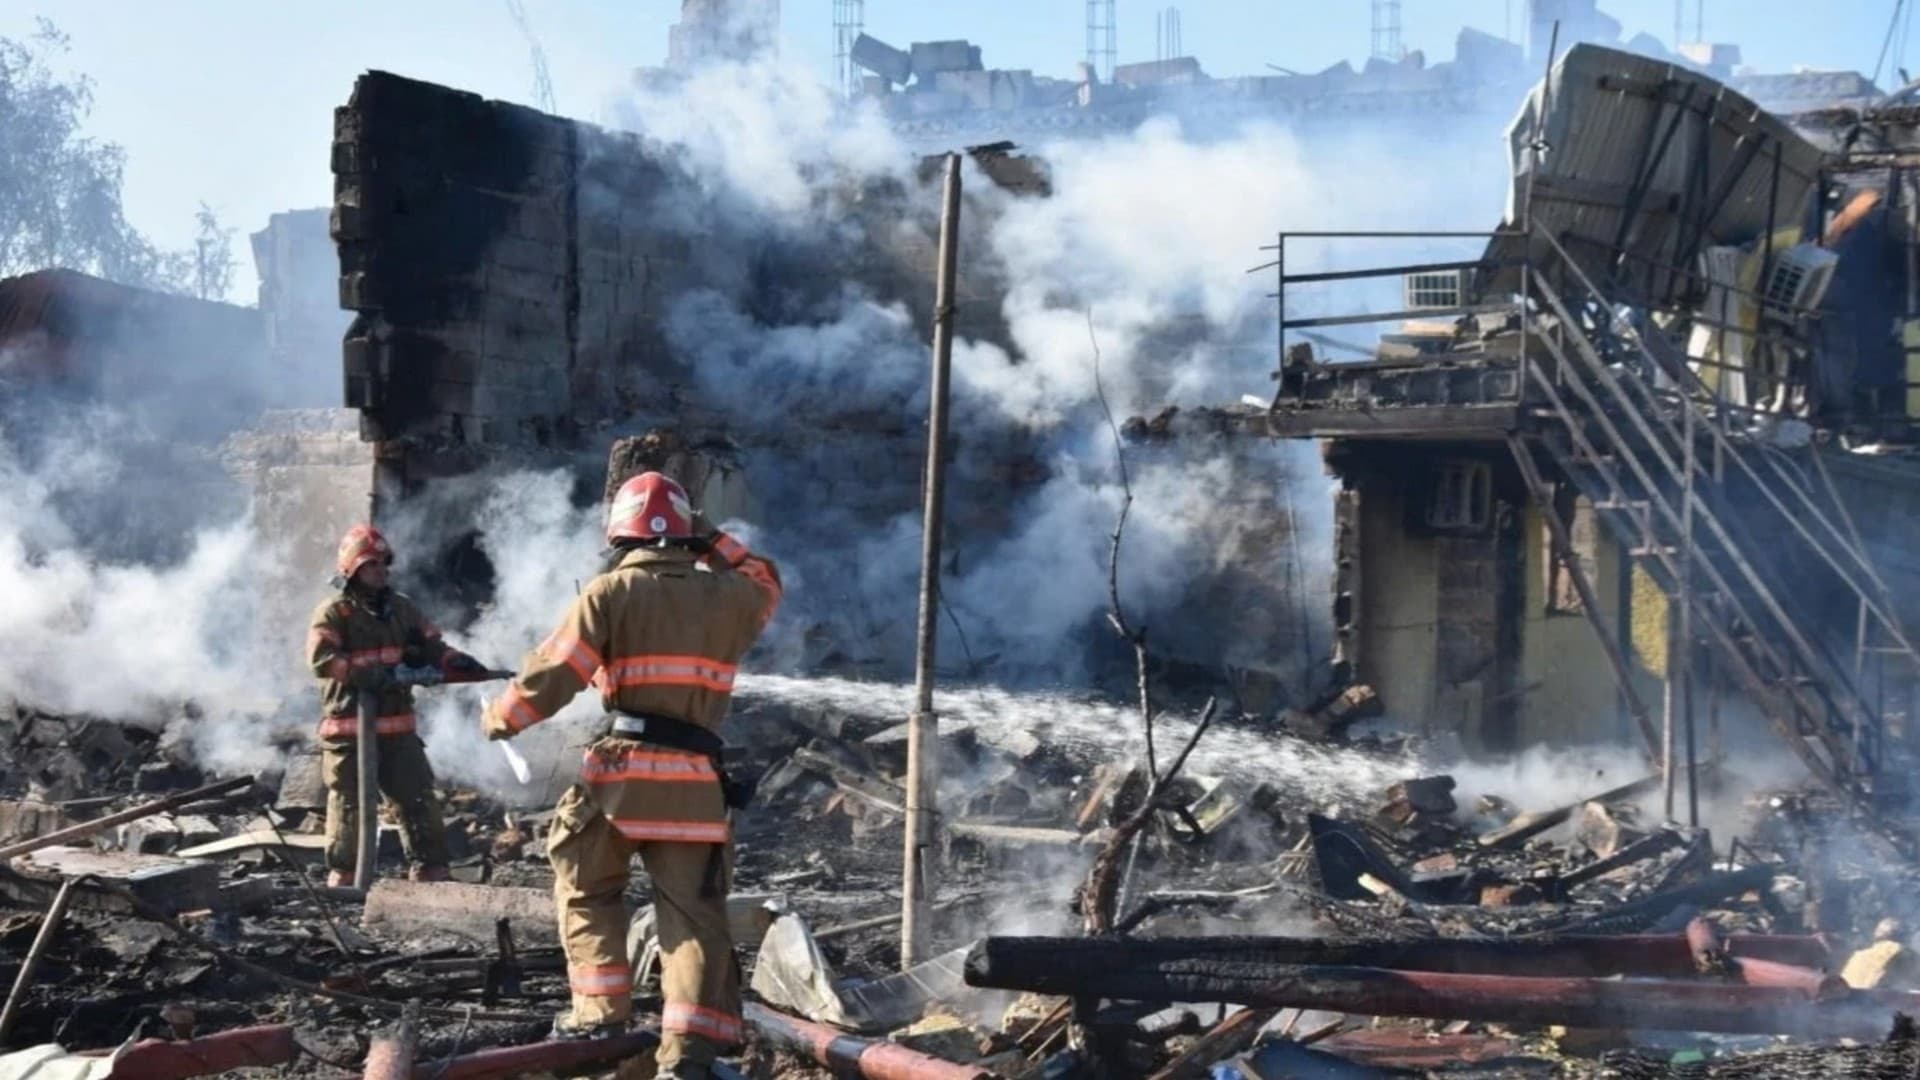 Firefighters work at the site of a residential area damaged by a Russia missile strike in Odesa